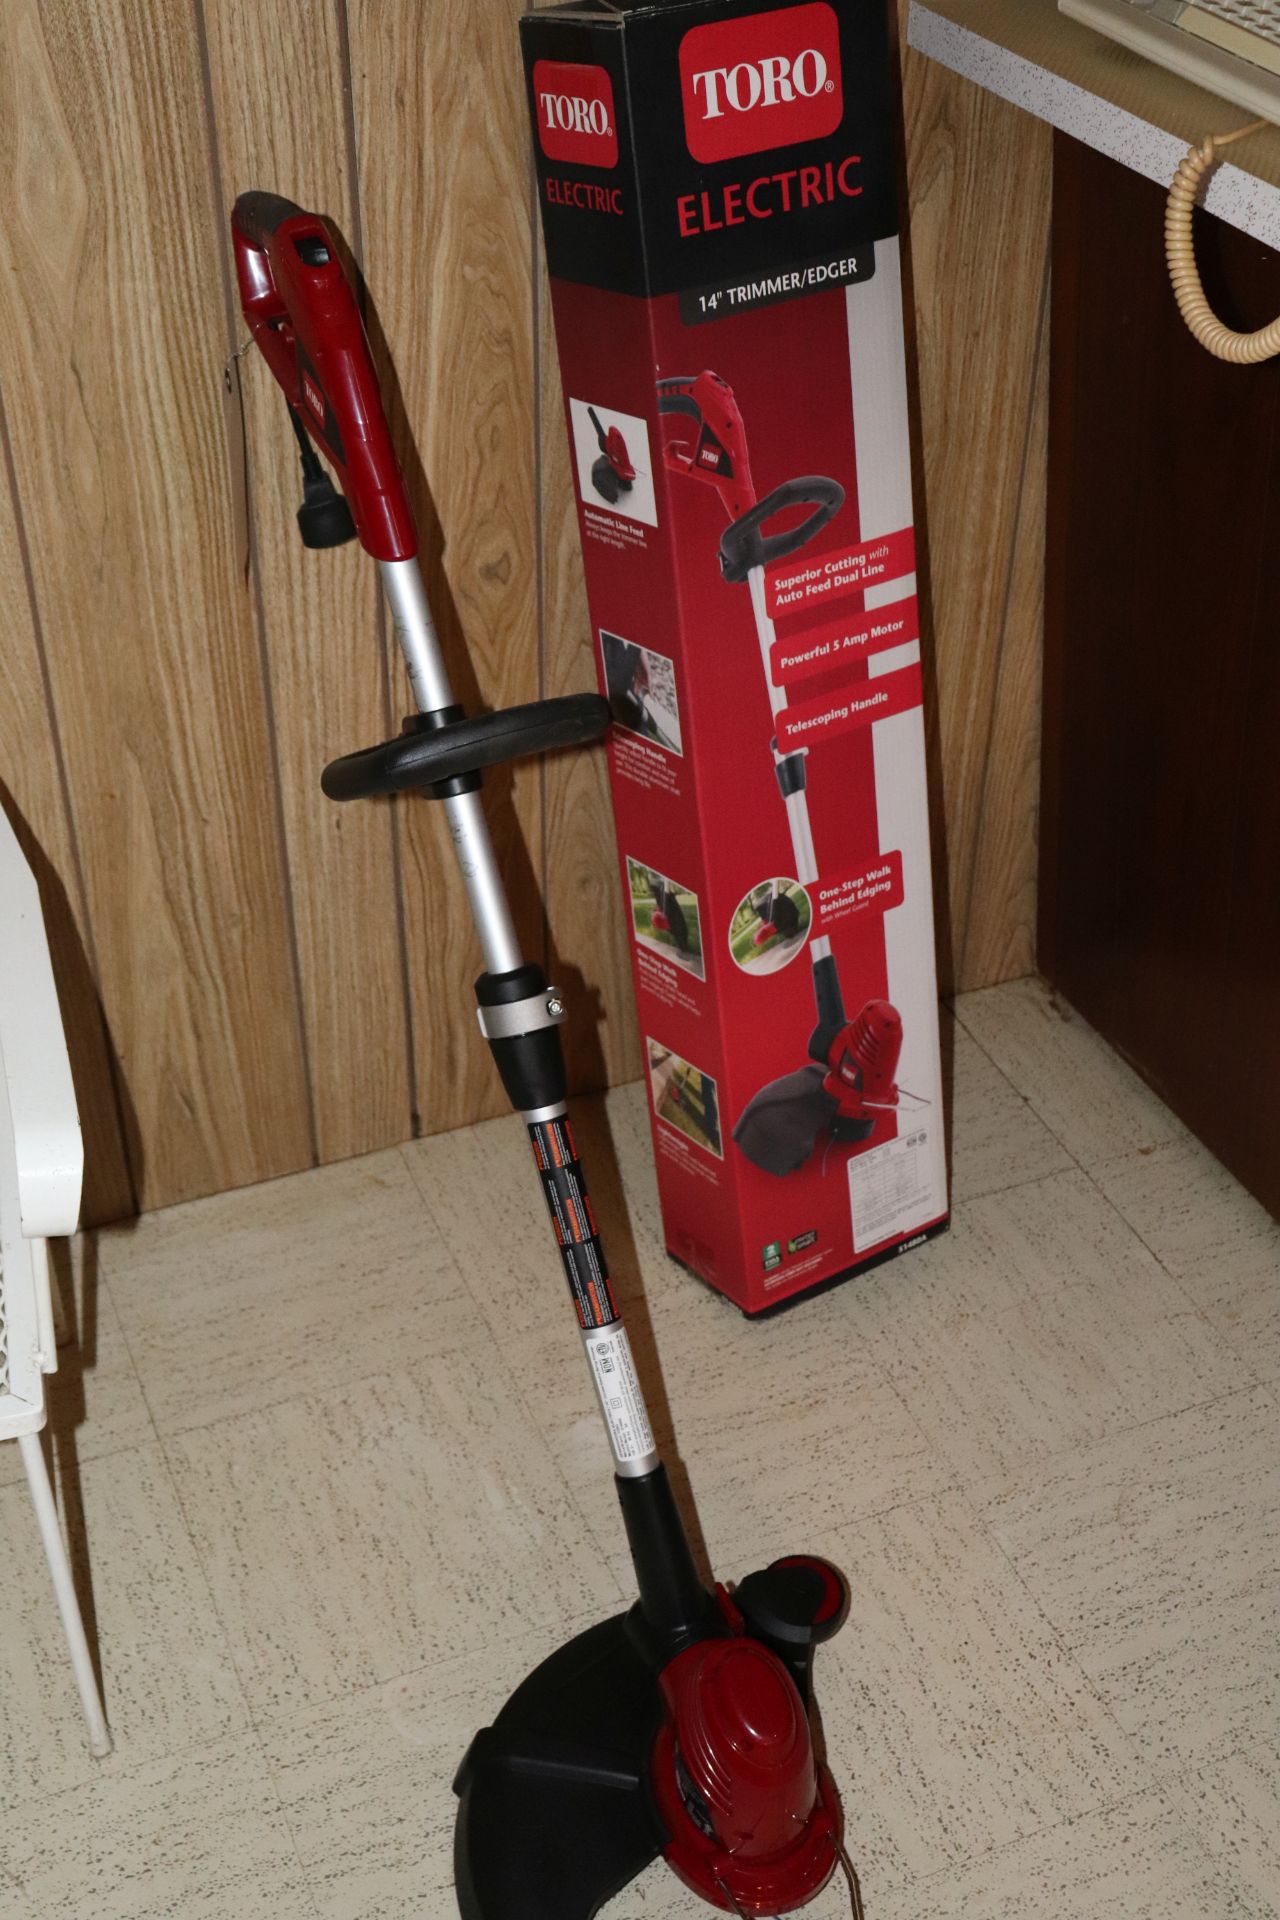 Toro electric 14" trimmer/edger with box